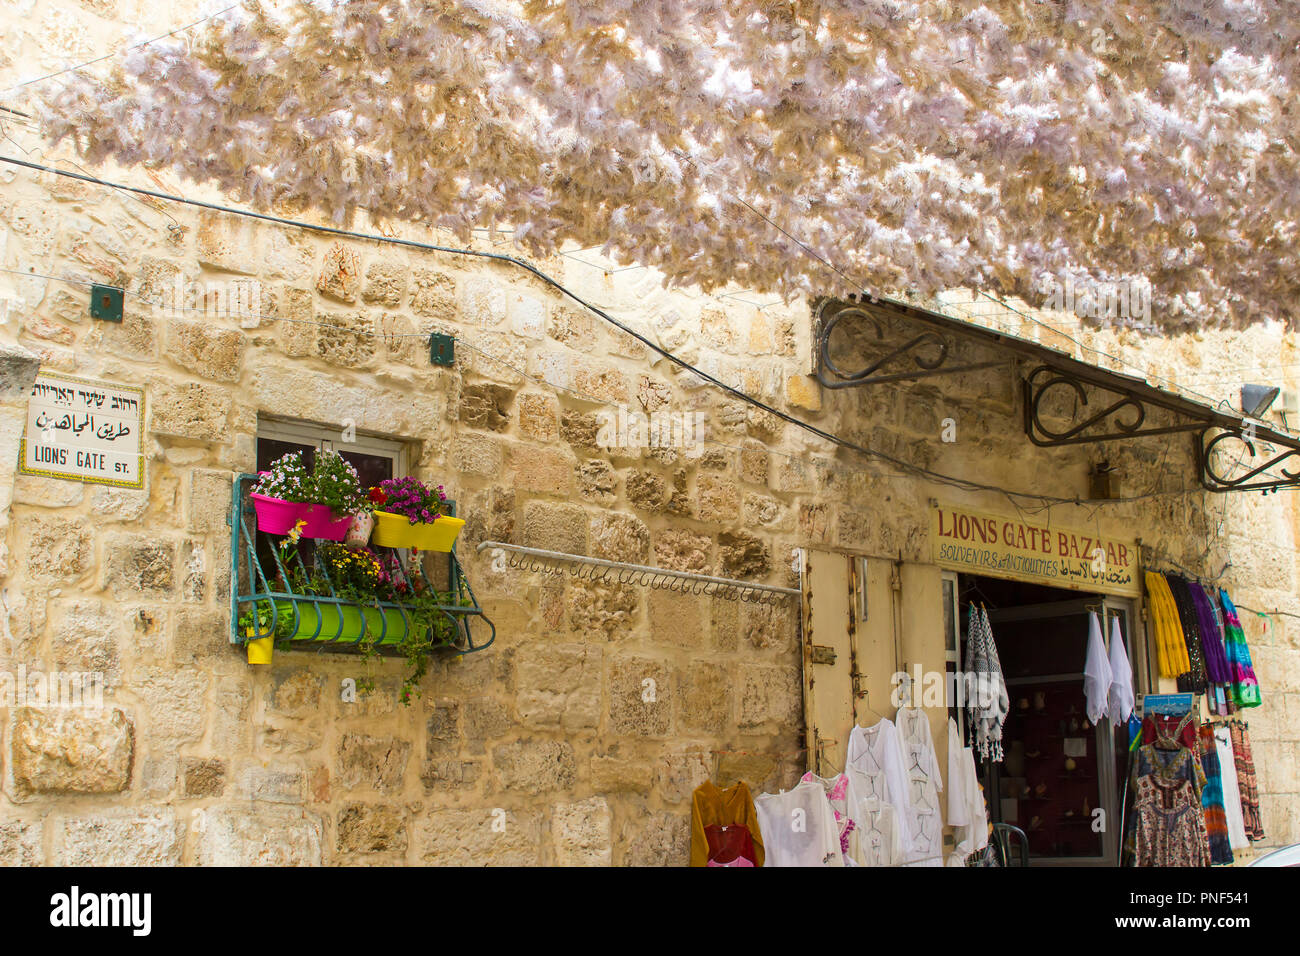 10 May 2018 A small shop doorway under a large feathery sun canopy suspended across the street in the old city Lions Gate Street Jerusalem, Israel. Stock Photo